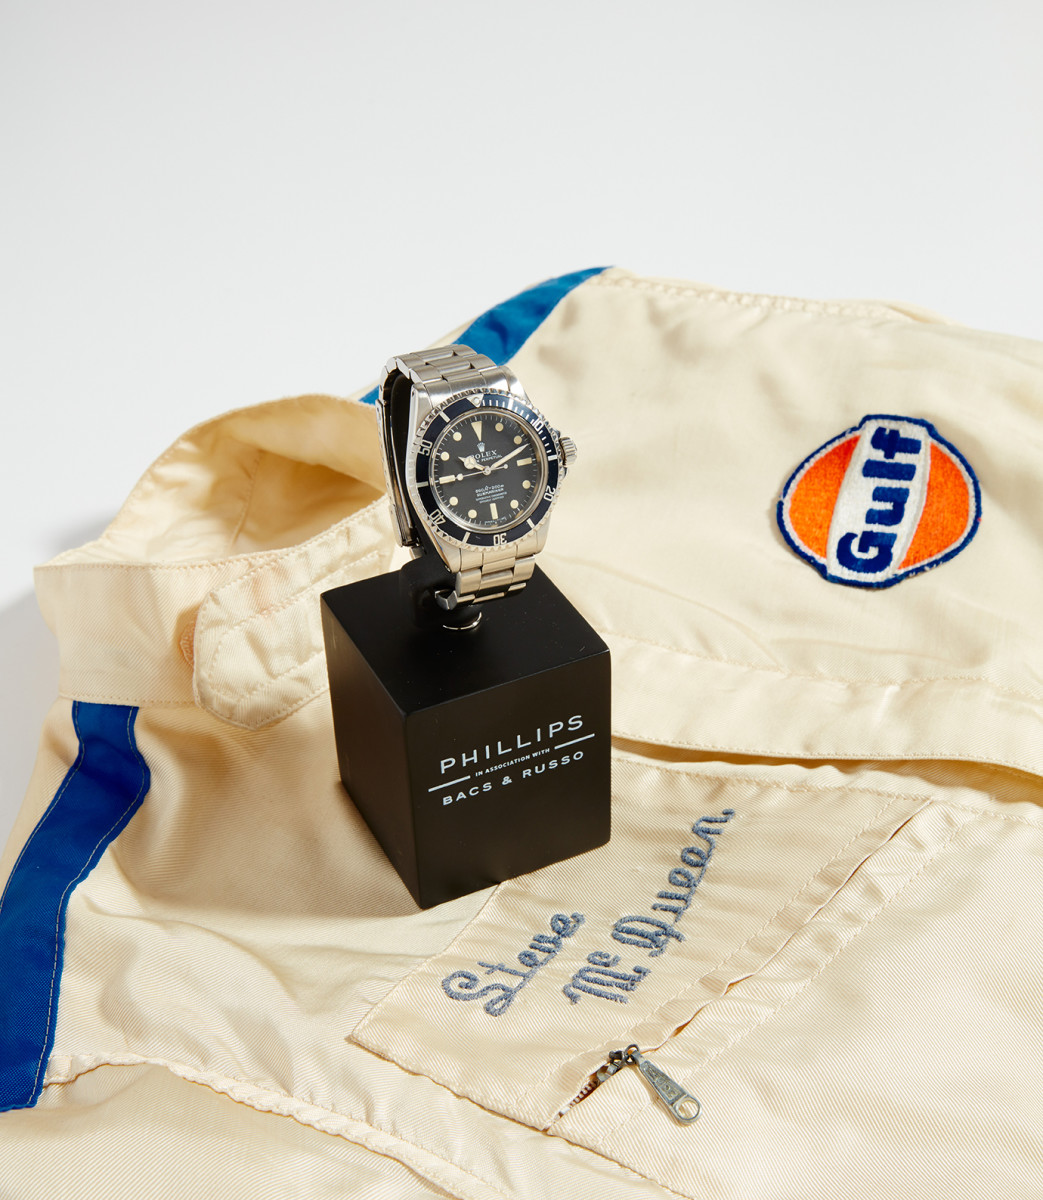 A Rolex Submariner that once belonged to Steve McQueen, along with the actor's personalized racing jumpsuit.